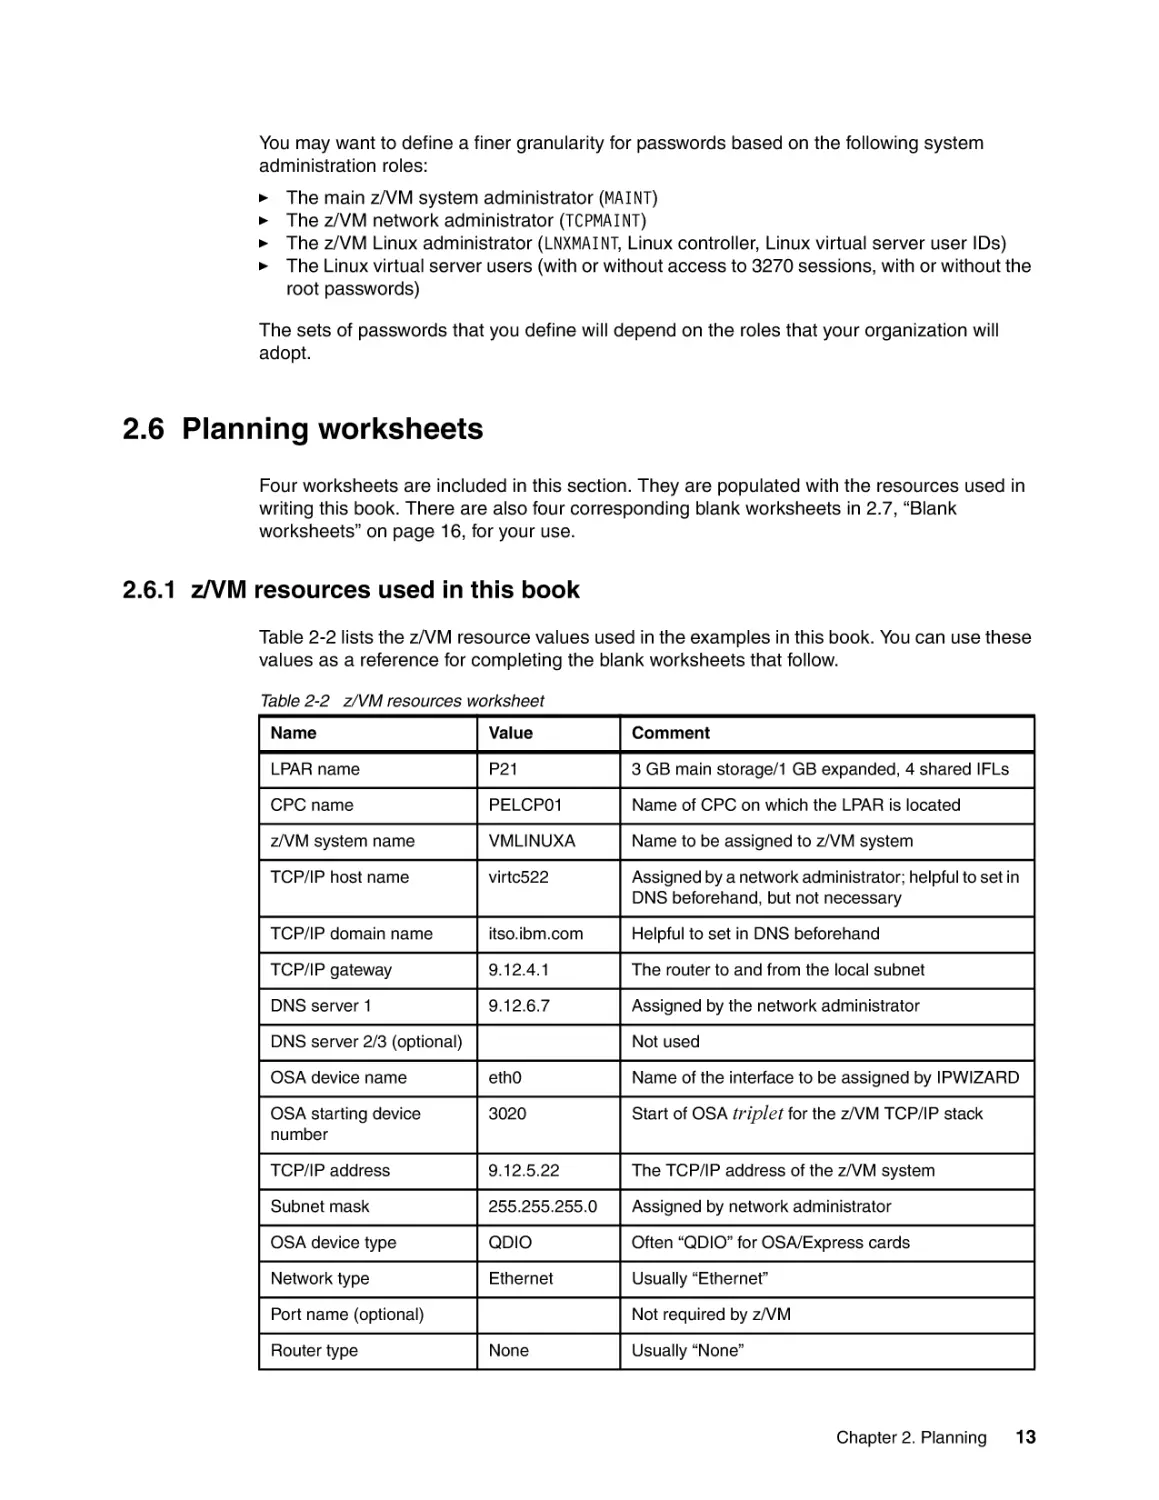 2.6 Planning worksheets
2.6.1 z/VM resources used in this book